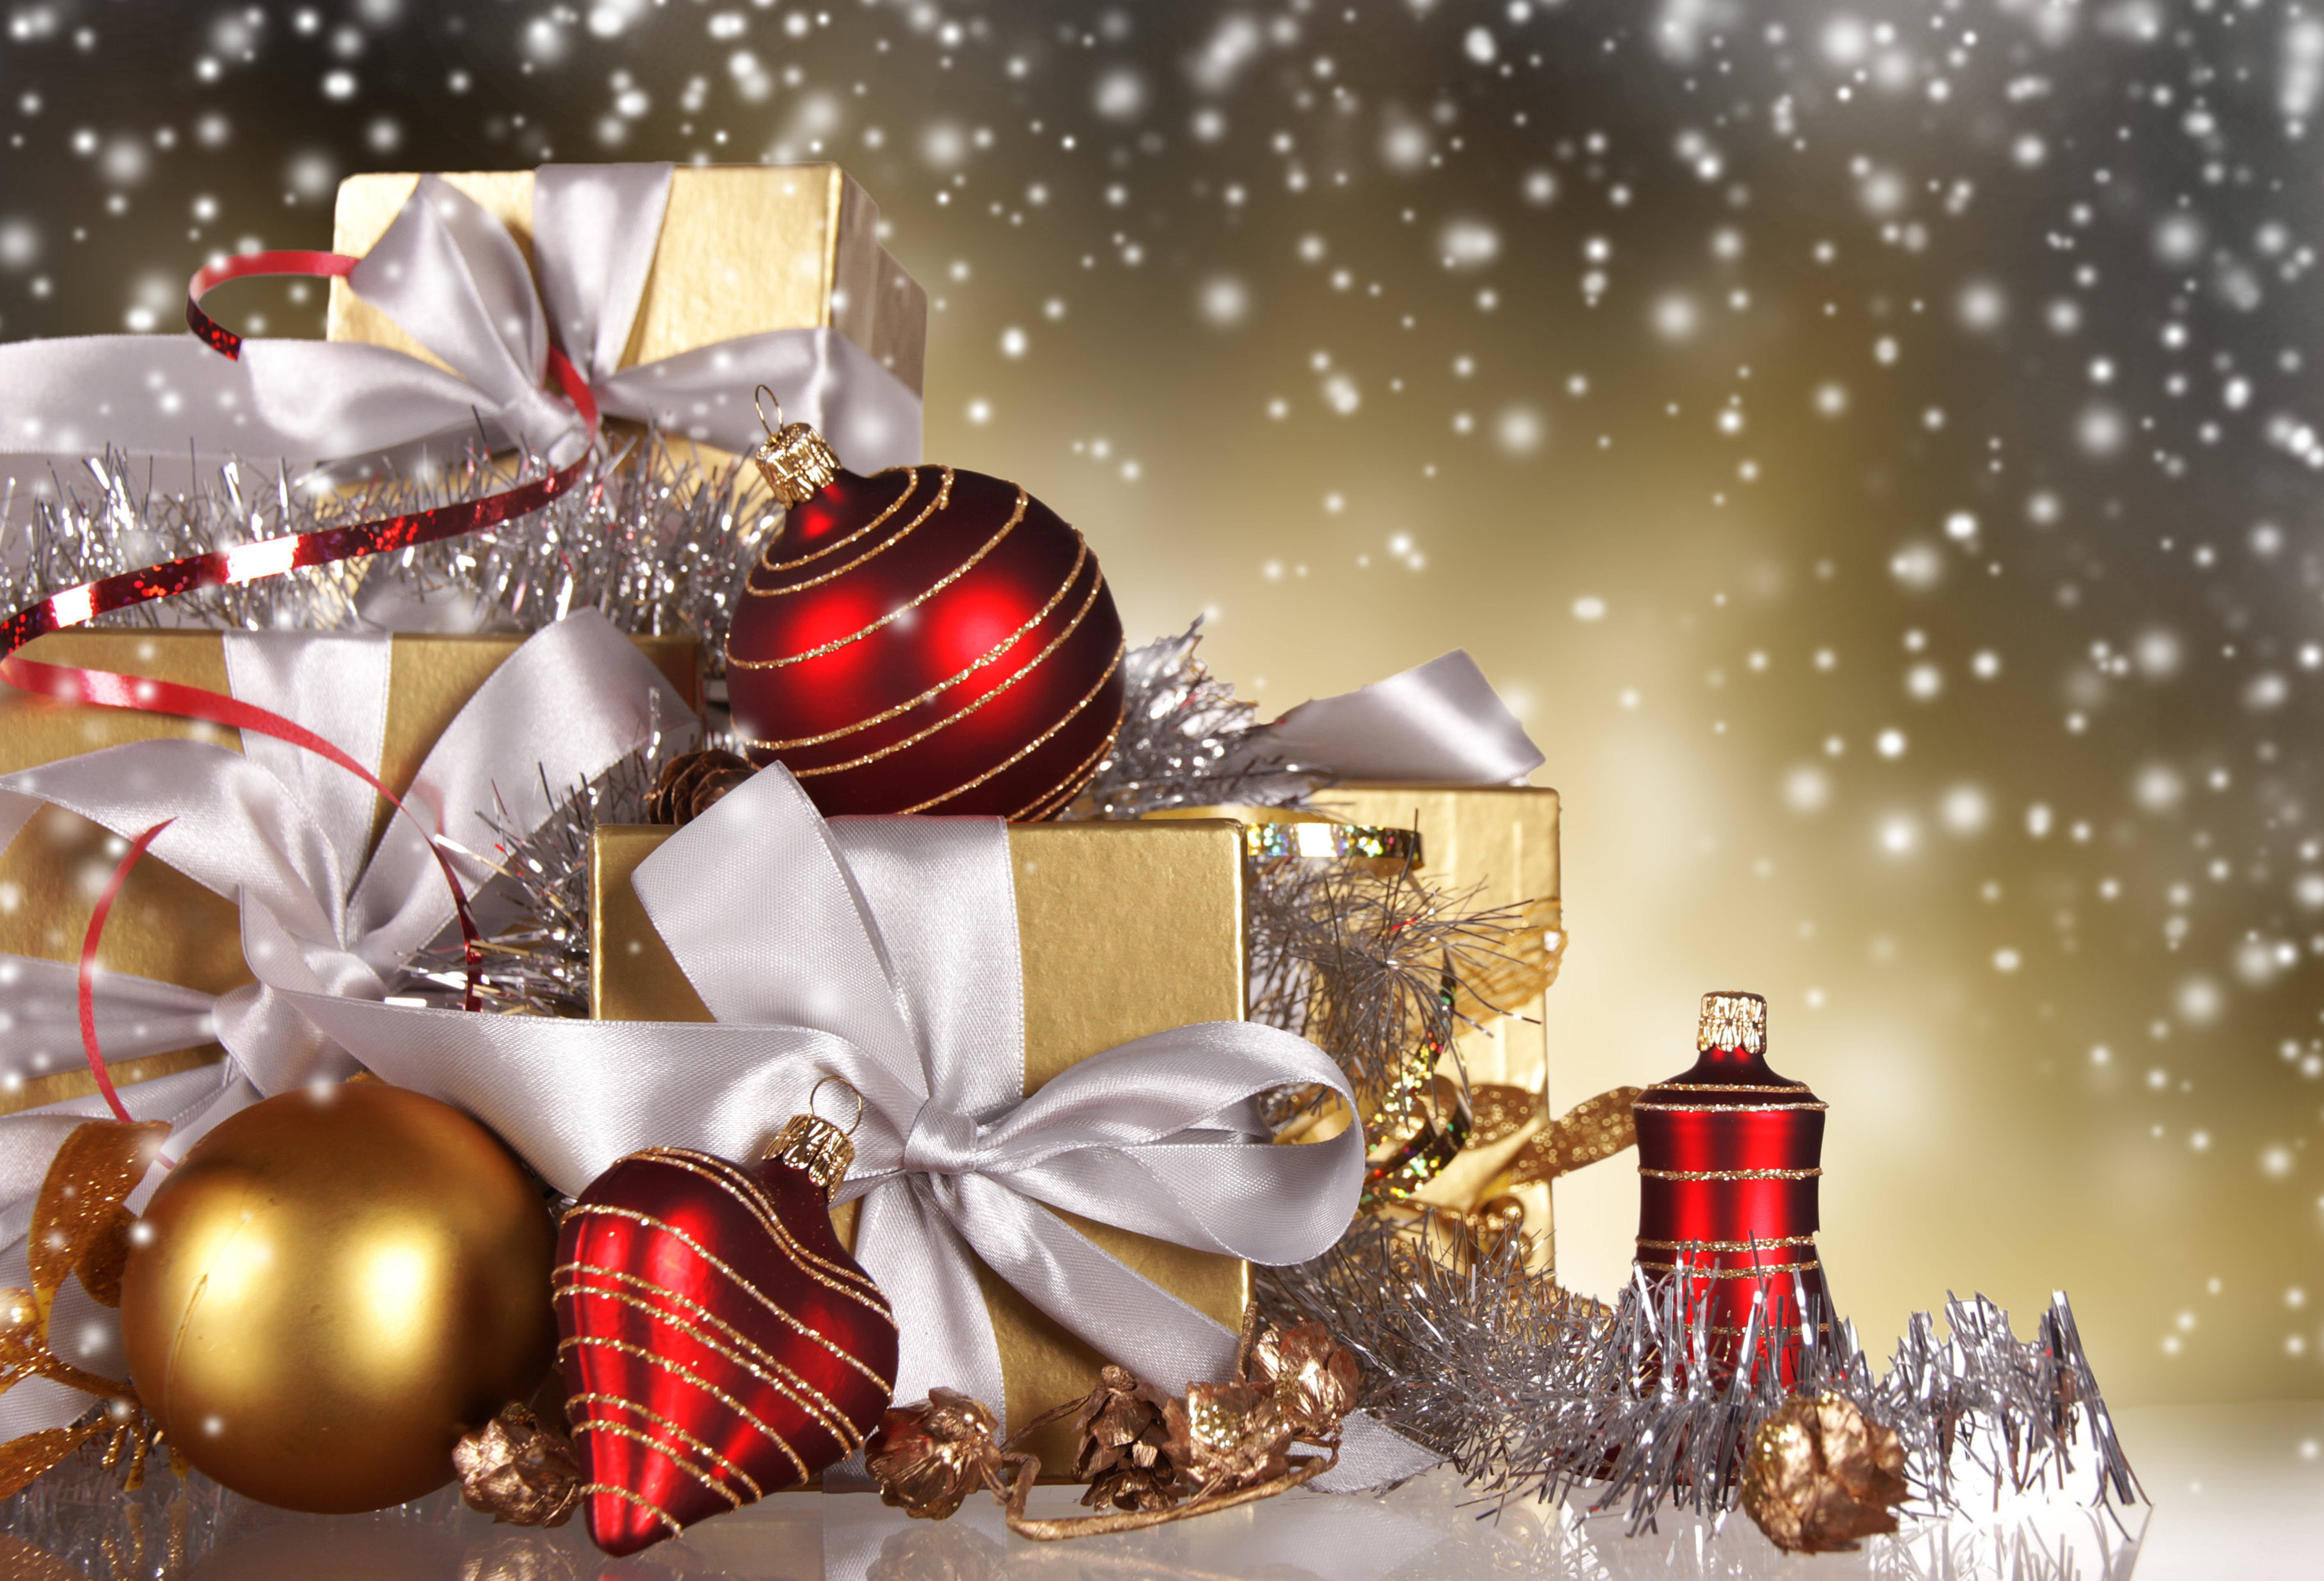 Enchanting Christmas Desktop with Gifts and Ornaments Wallpaper